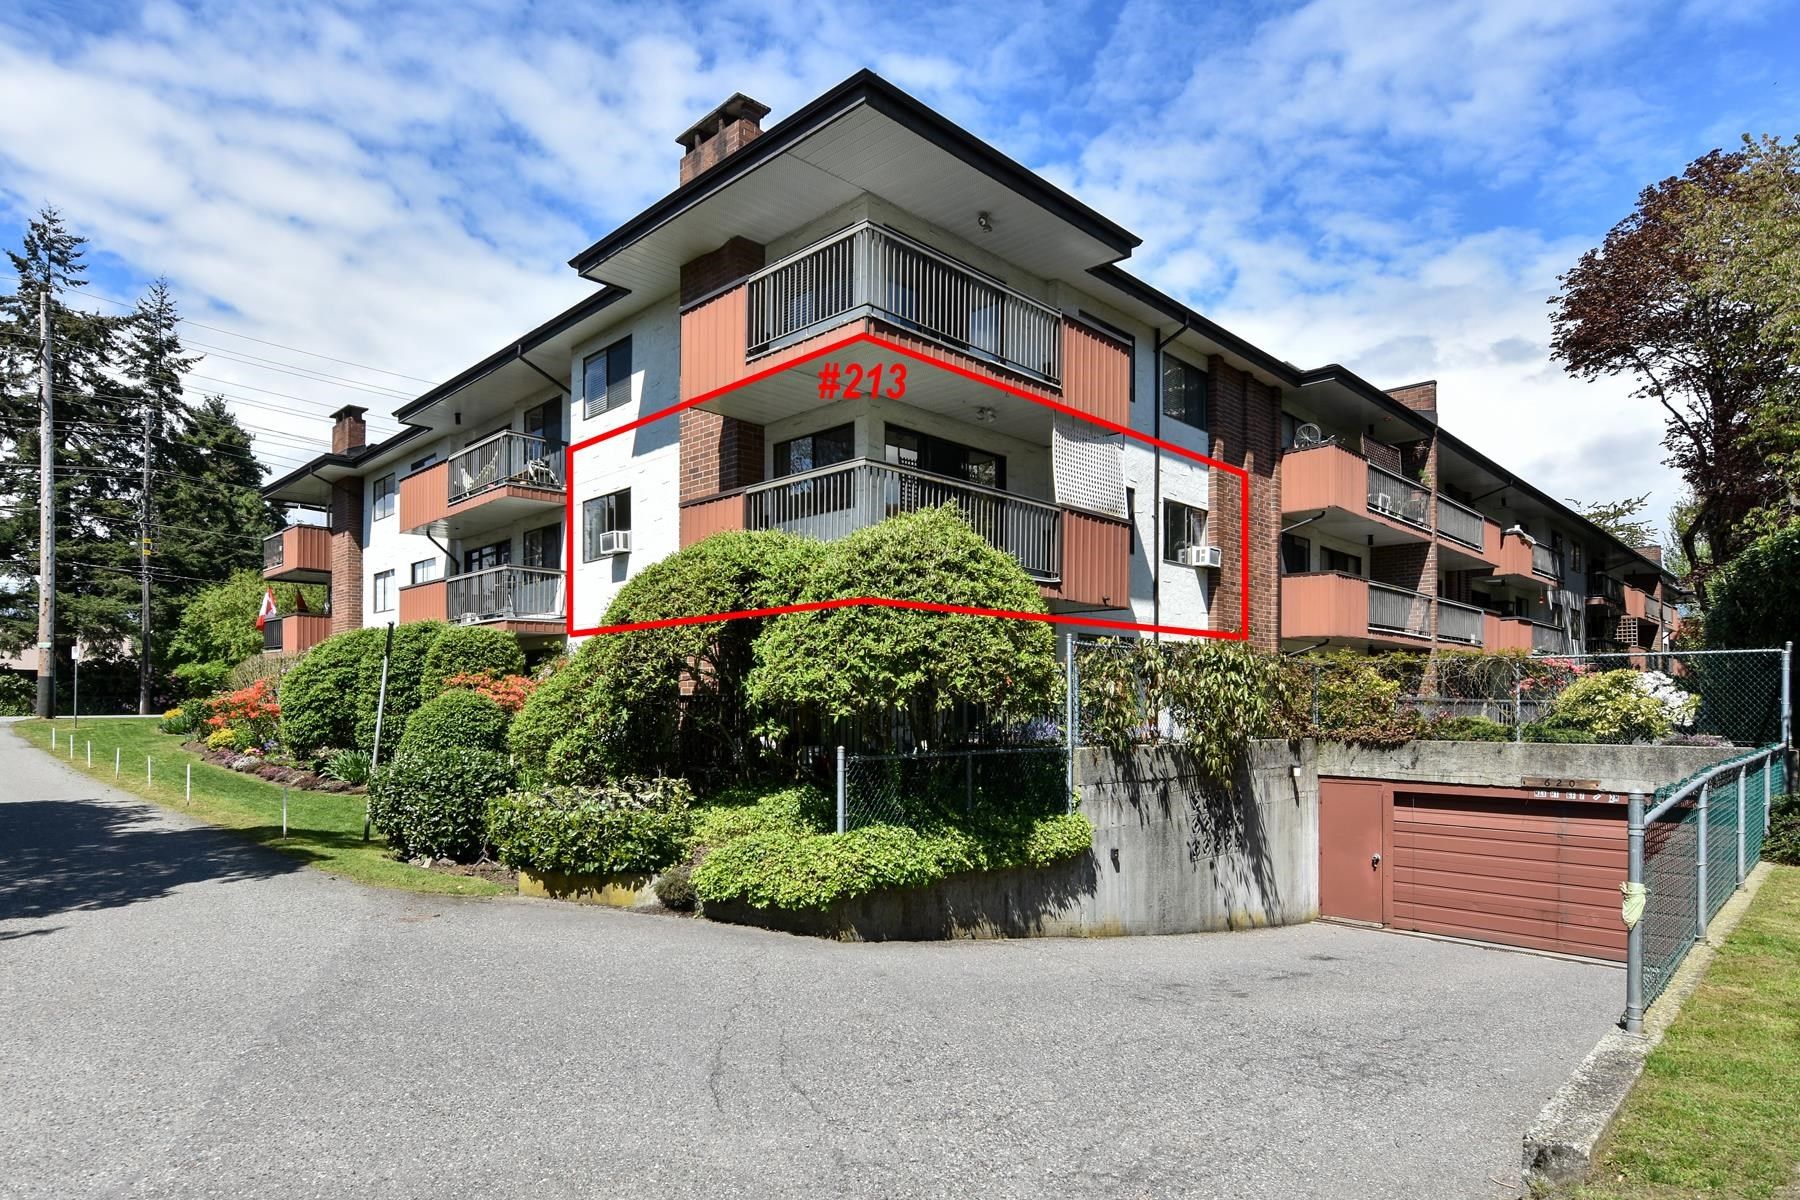 Property Sold by Our Office at 213 620 EIGHTH AVE in New Westminster